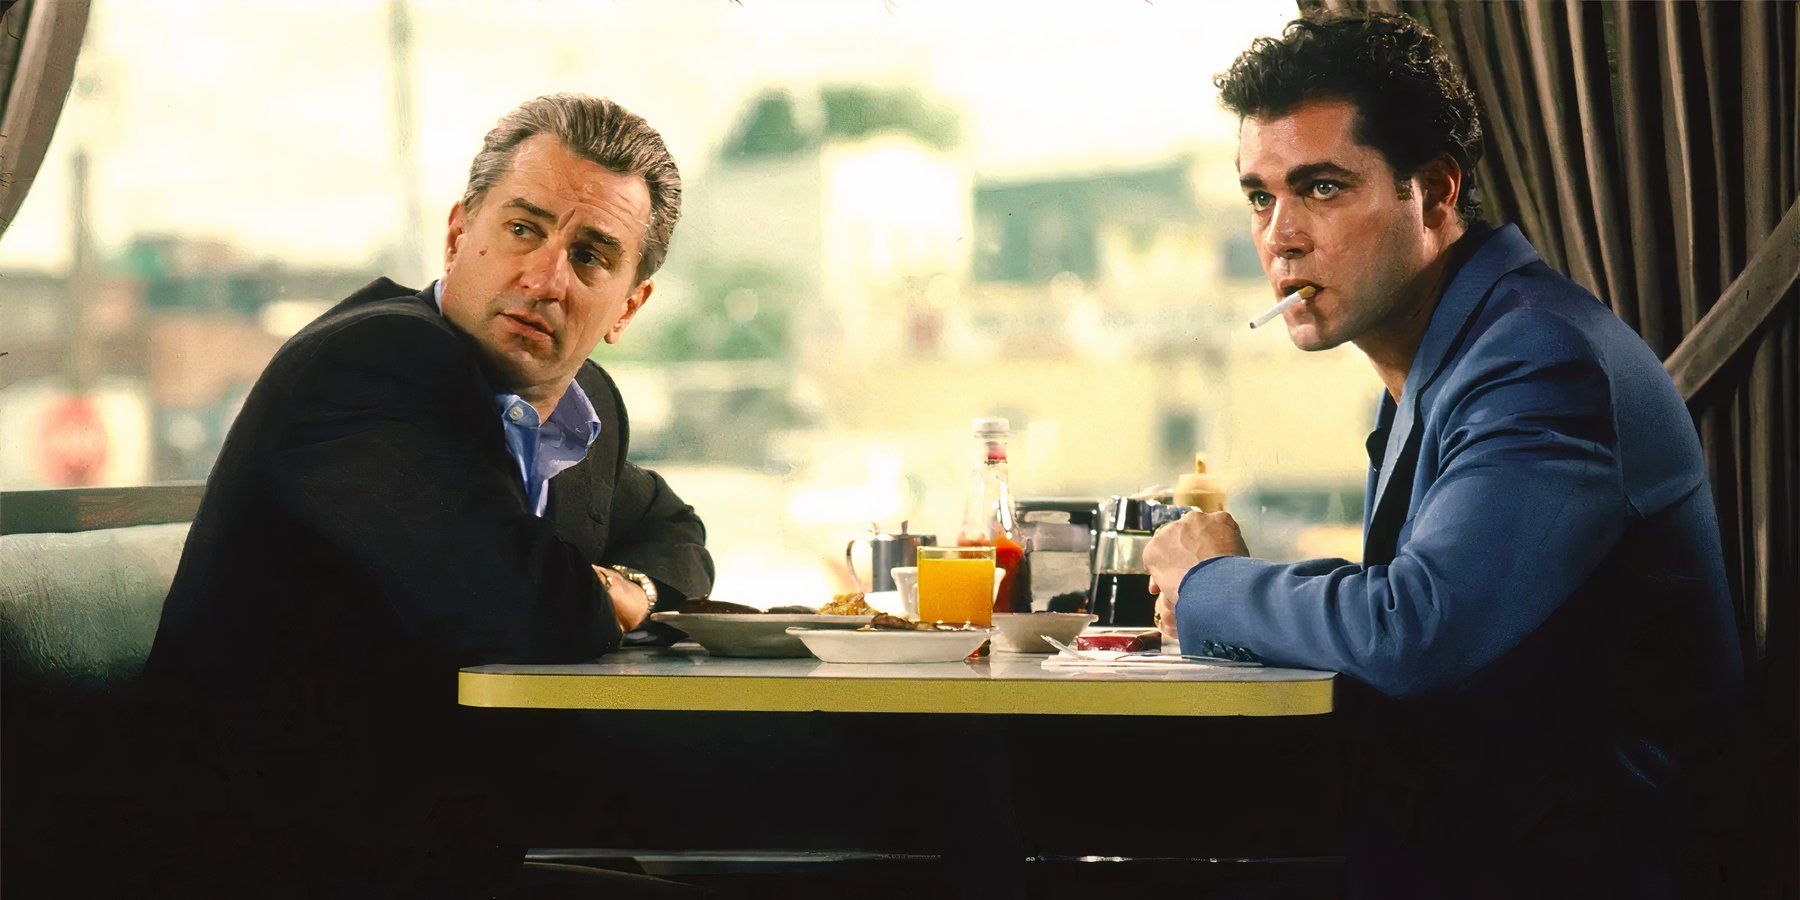 Robert De Niro as James Conway and Ray Liotta as Henry Hill share a meal at a diner in Goodfellas